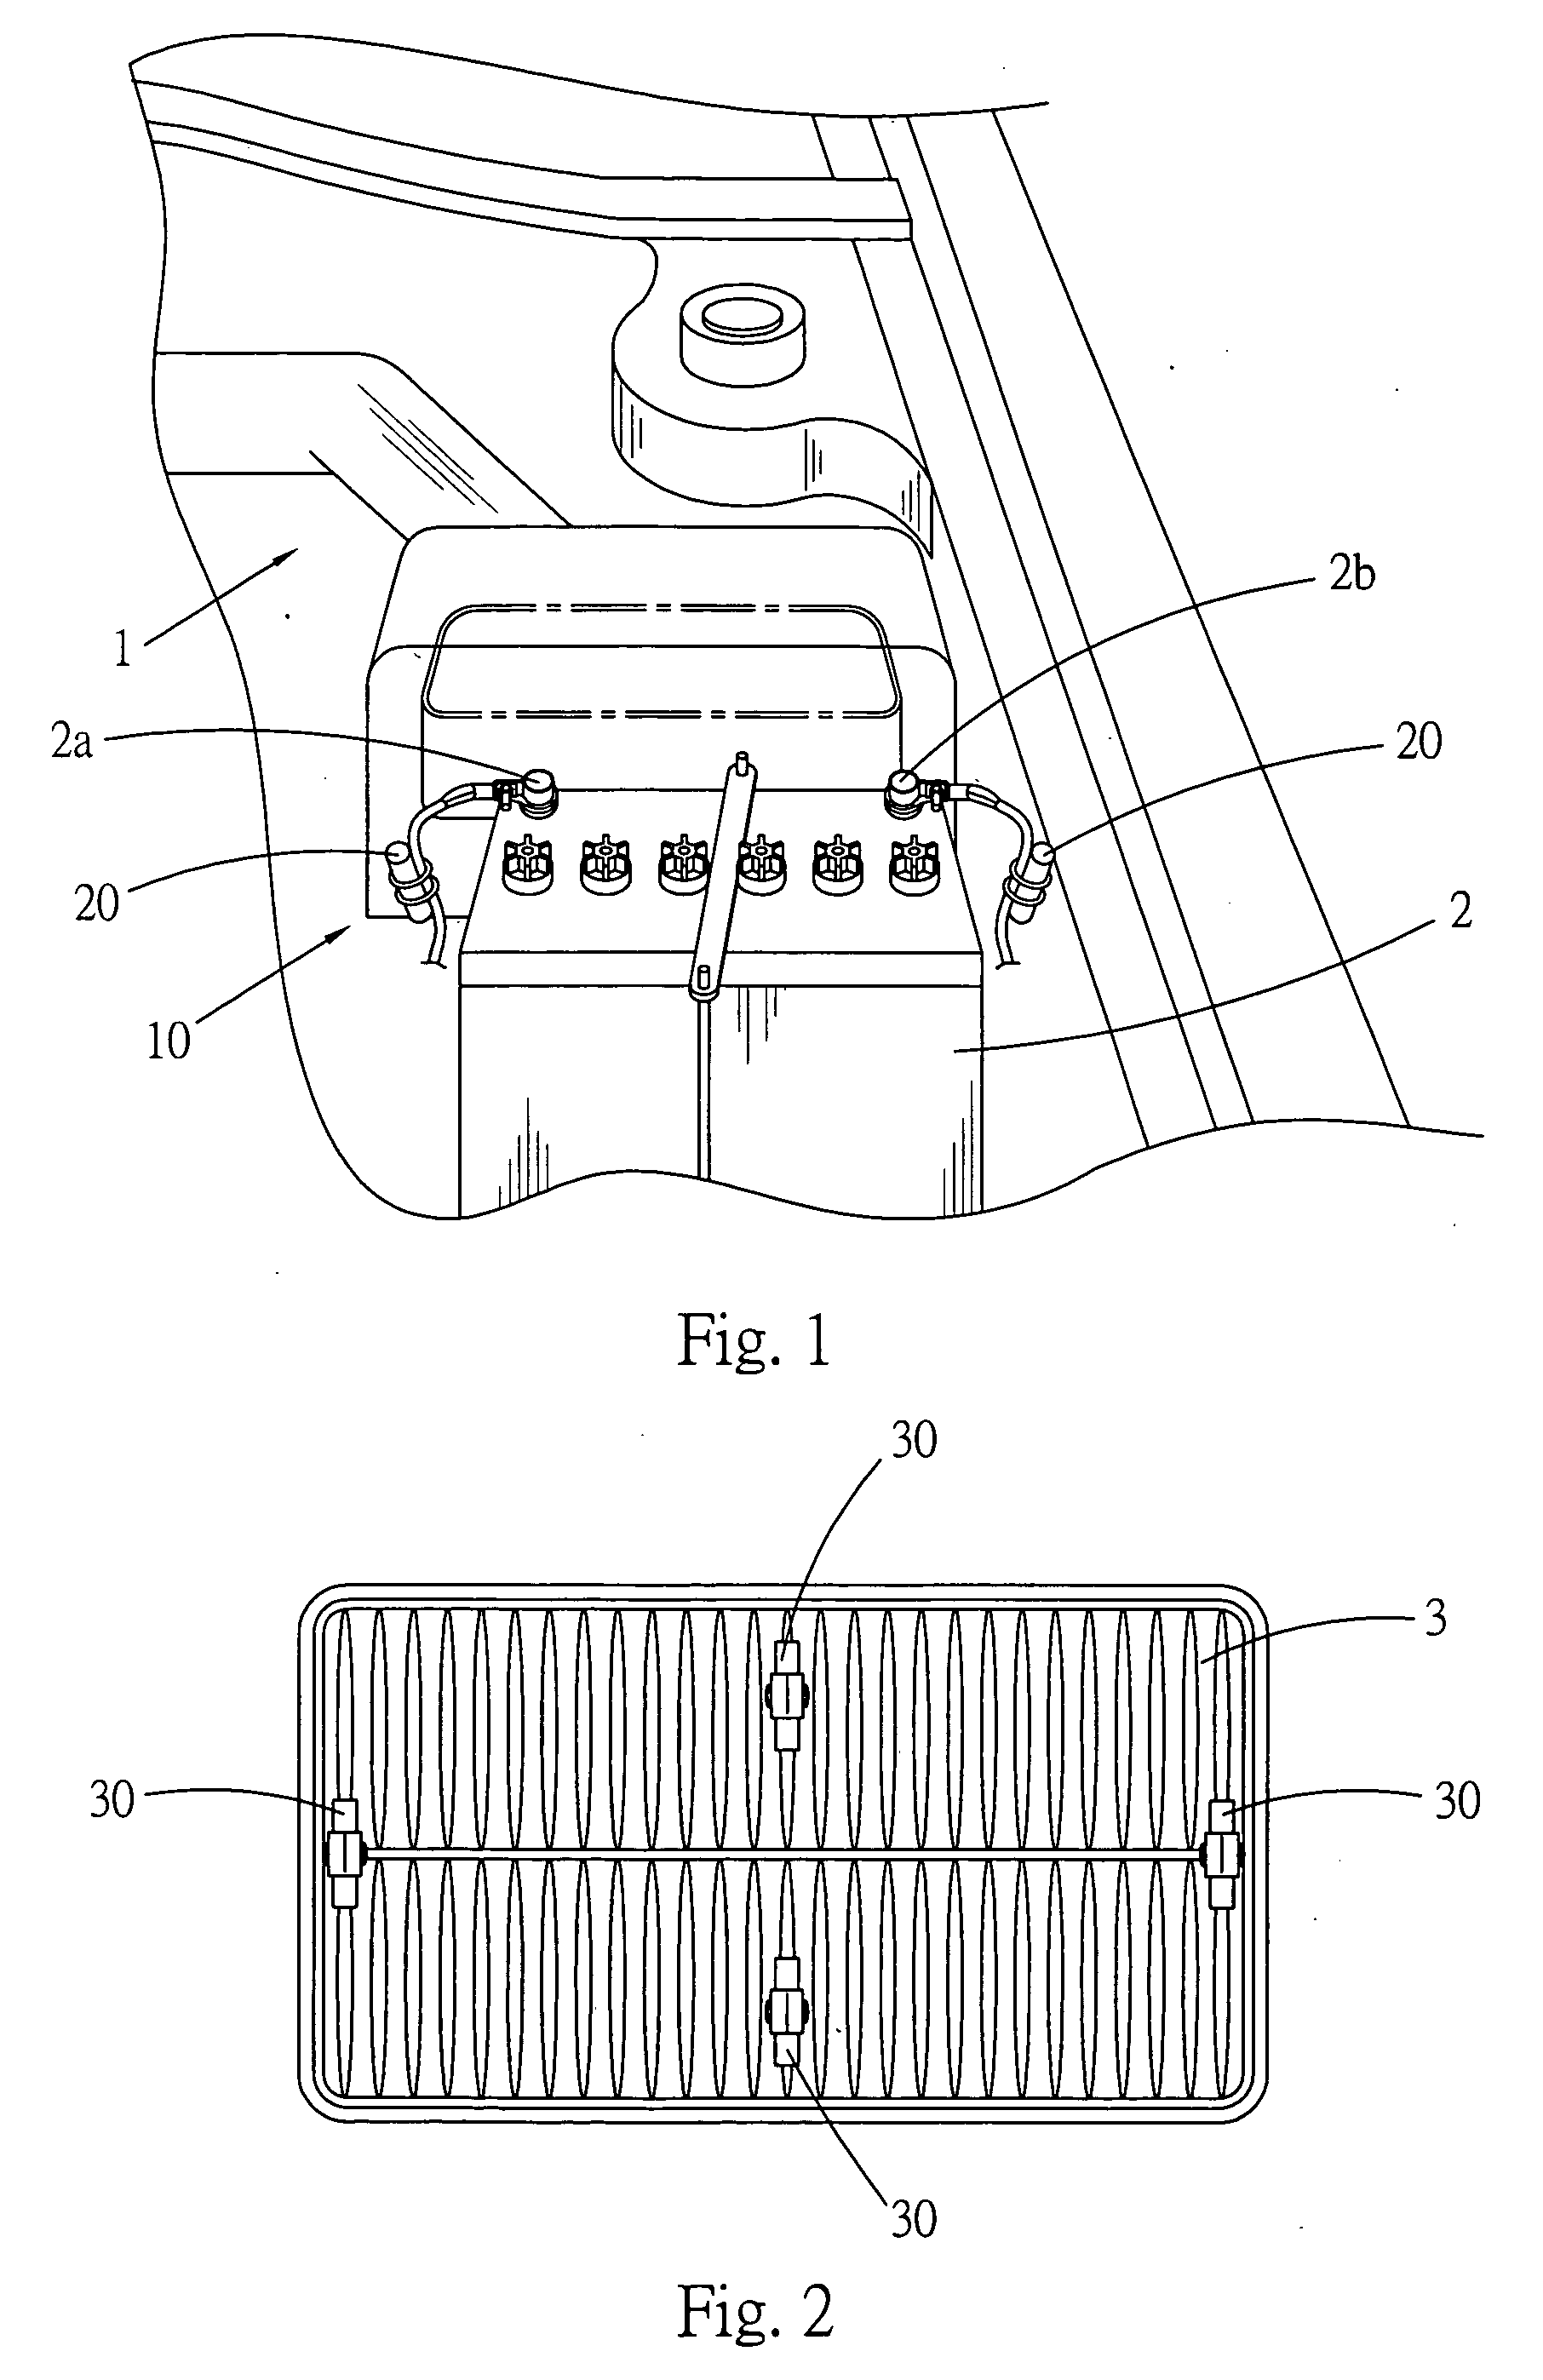 Energy-releasing apparatus for energizing and covibrating fuel molecules and arranging reactant molecules